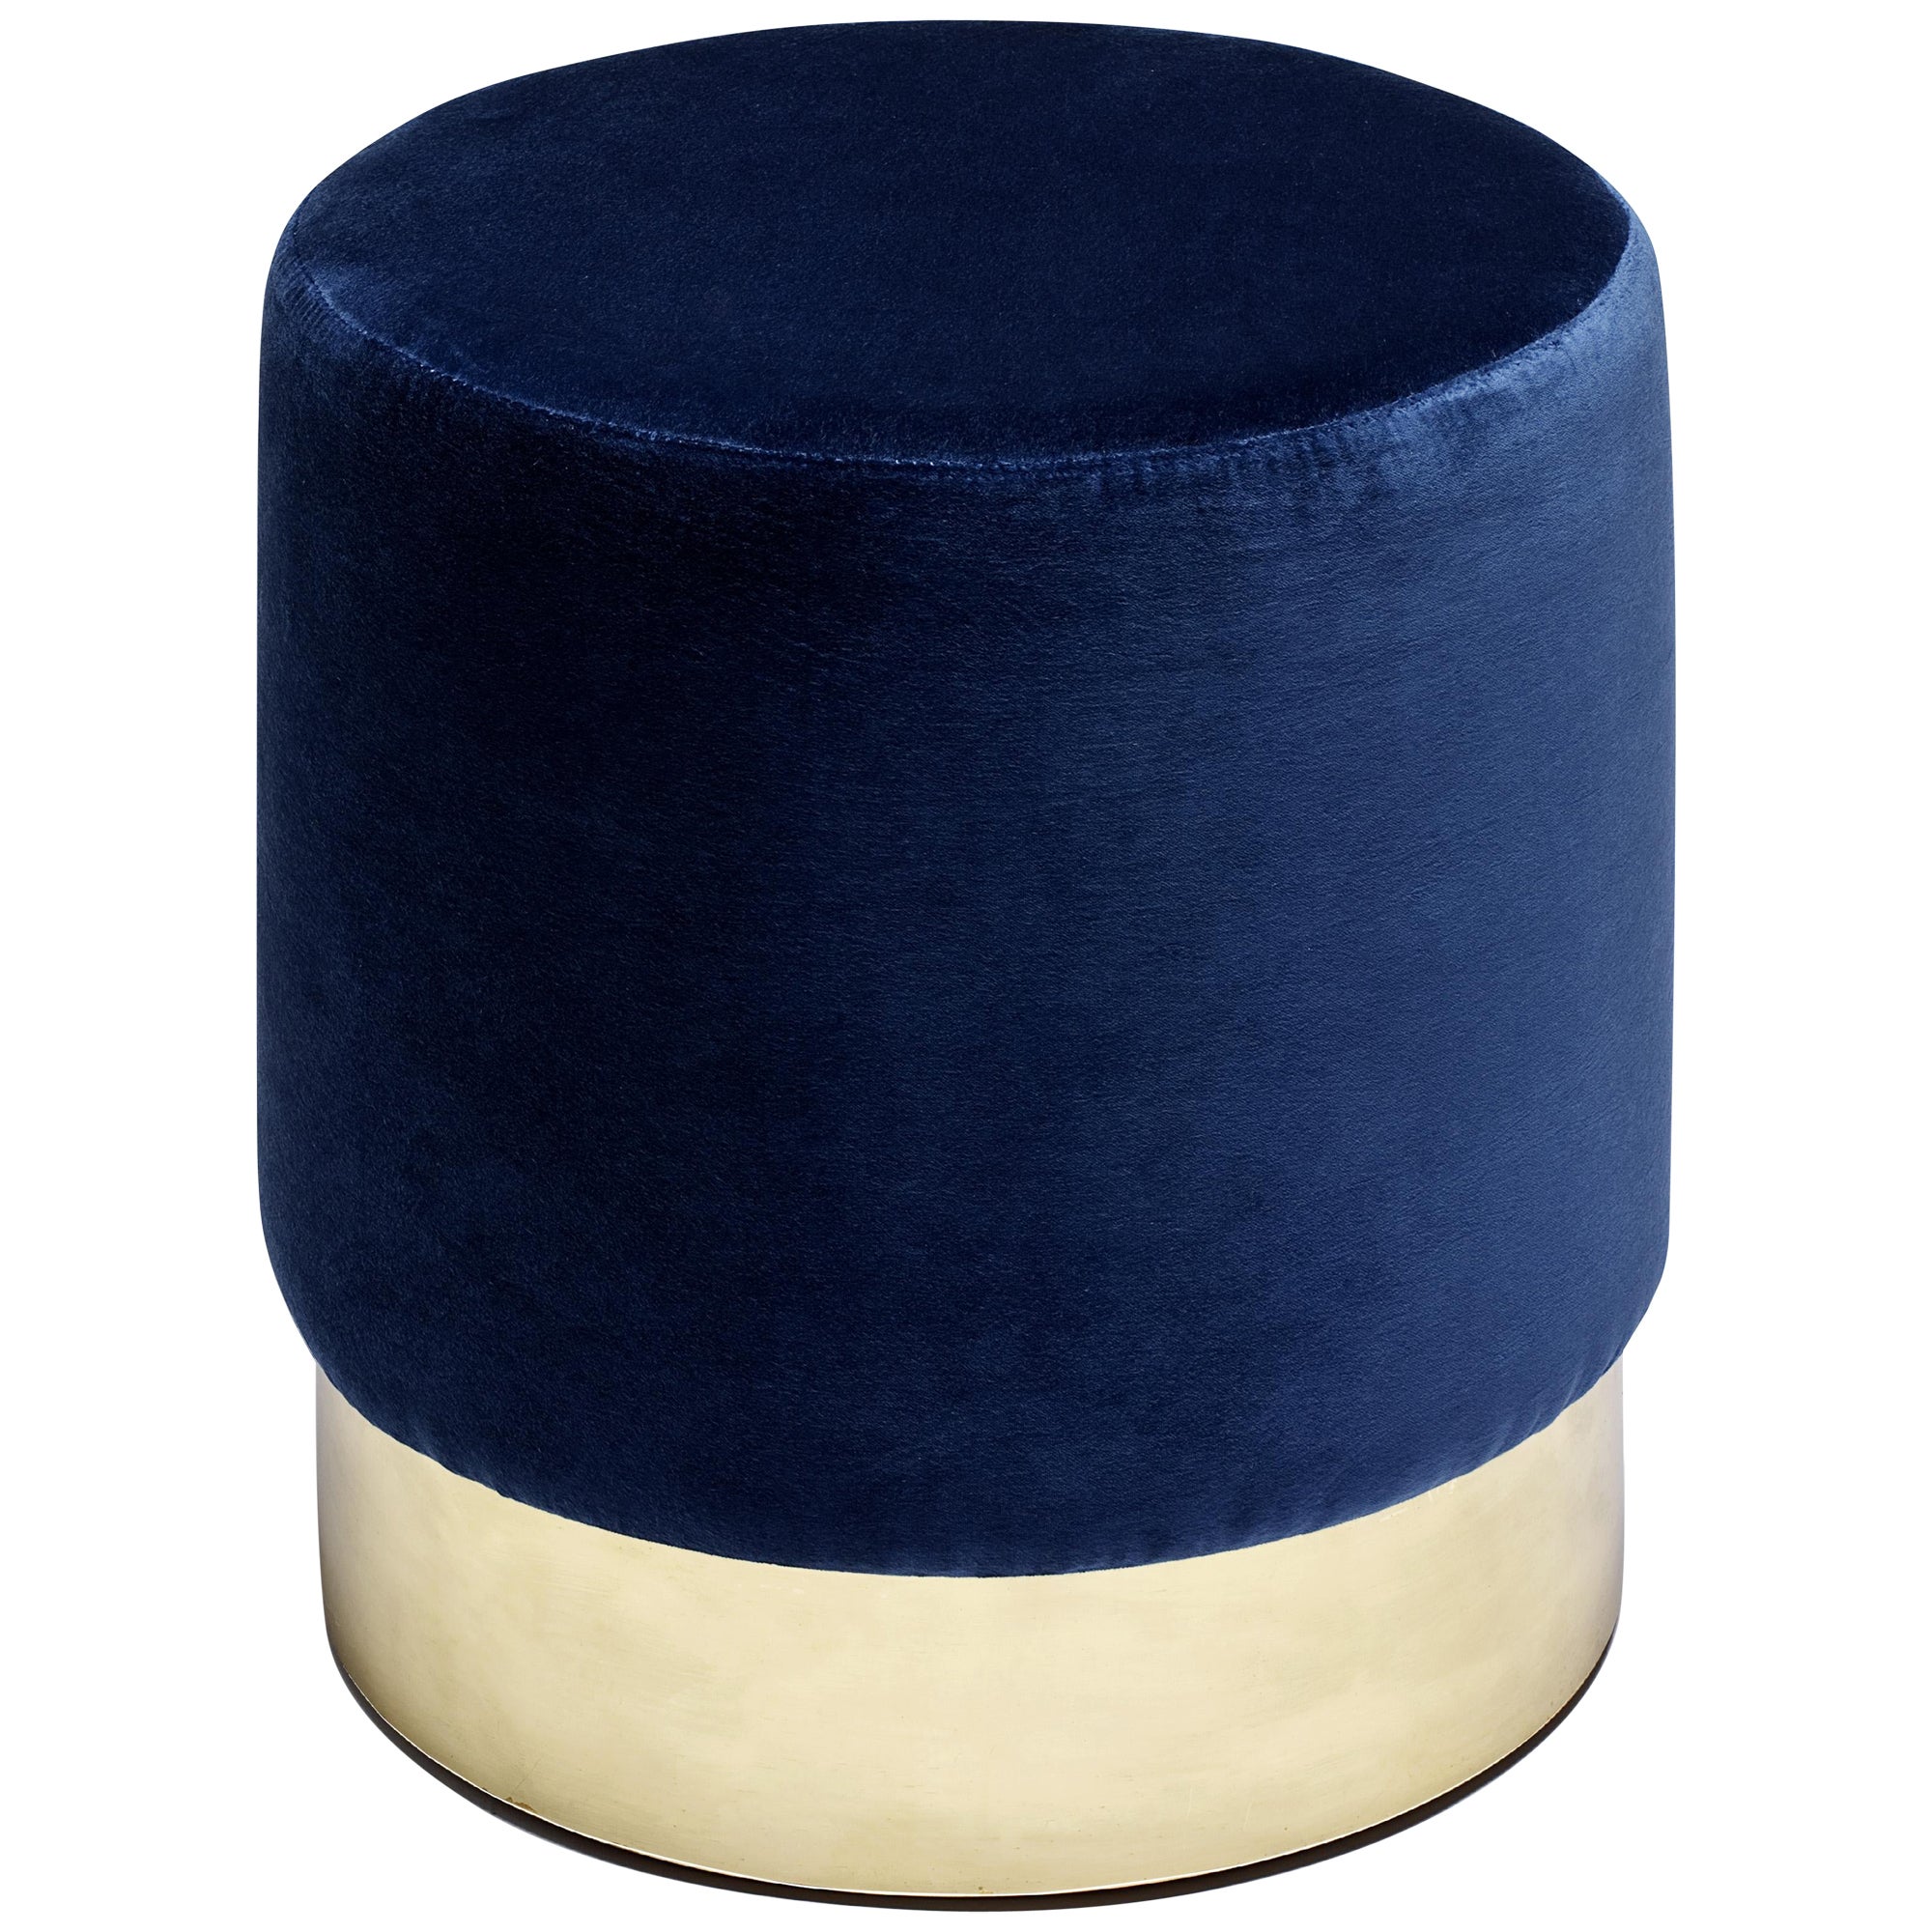 Lune C Stool, Velvet Upholstery and Polished Brass, Handcrafted by Duistt